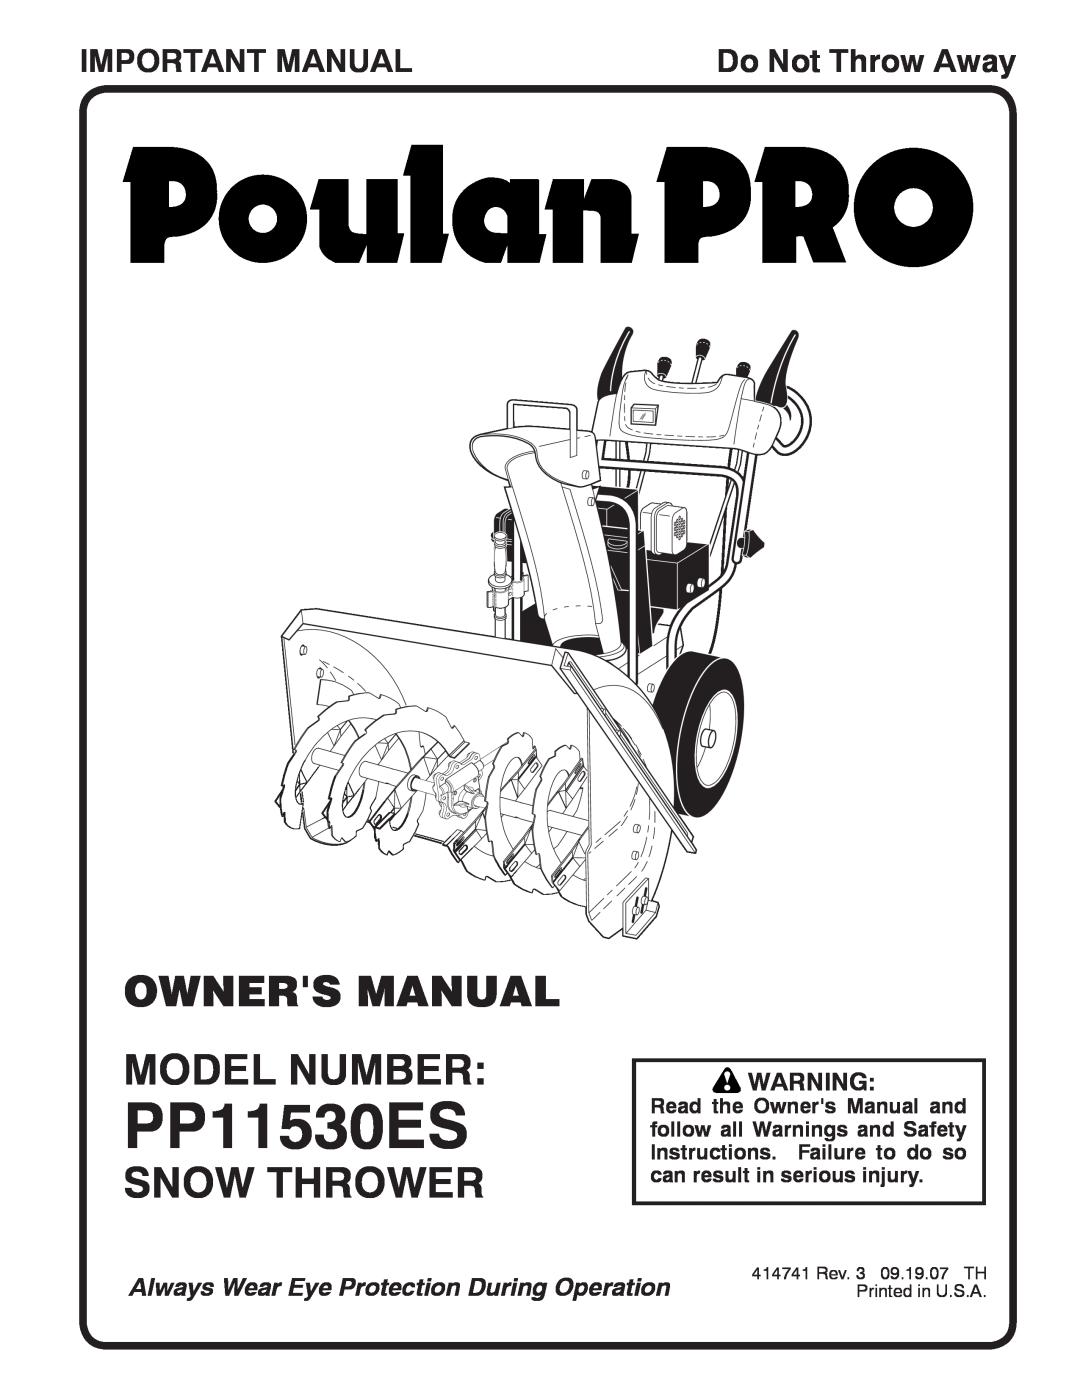 Poulan PP11530ES owner manual Owners Manual Model Number, Snow Thrower, Important Manual, Do Not Throw Away 